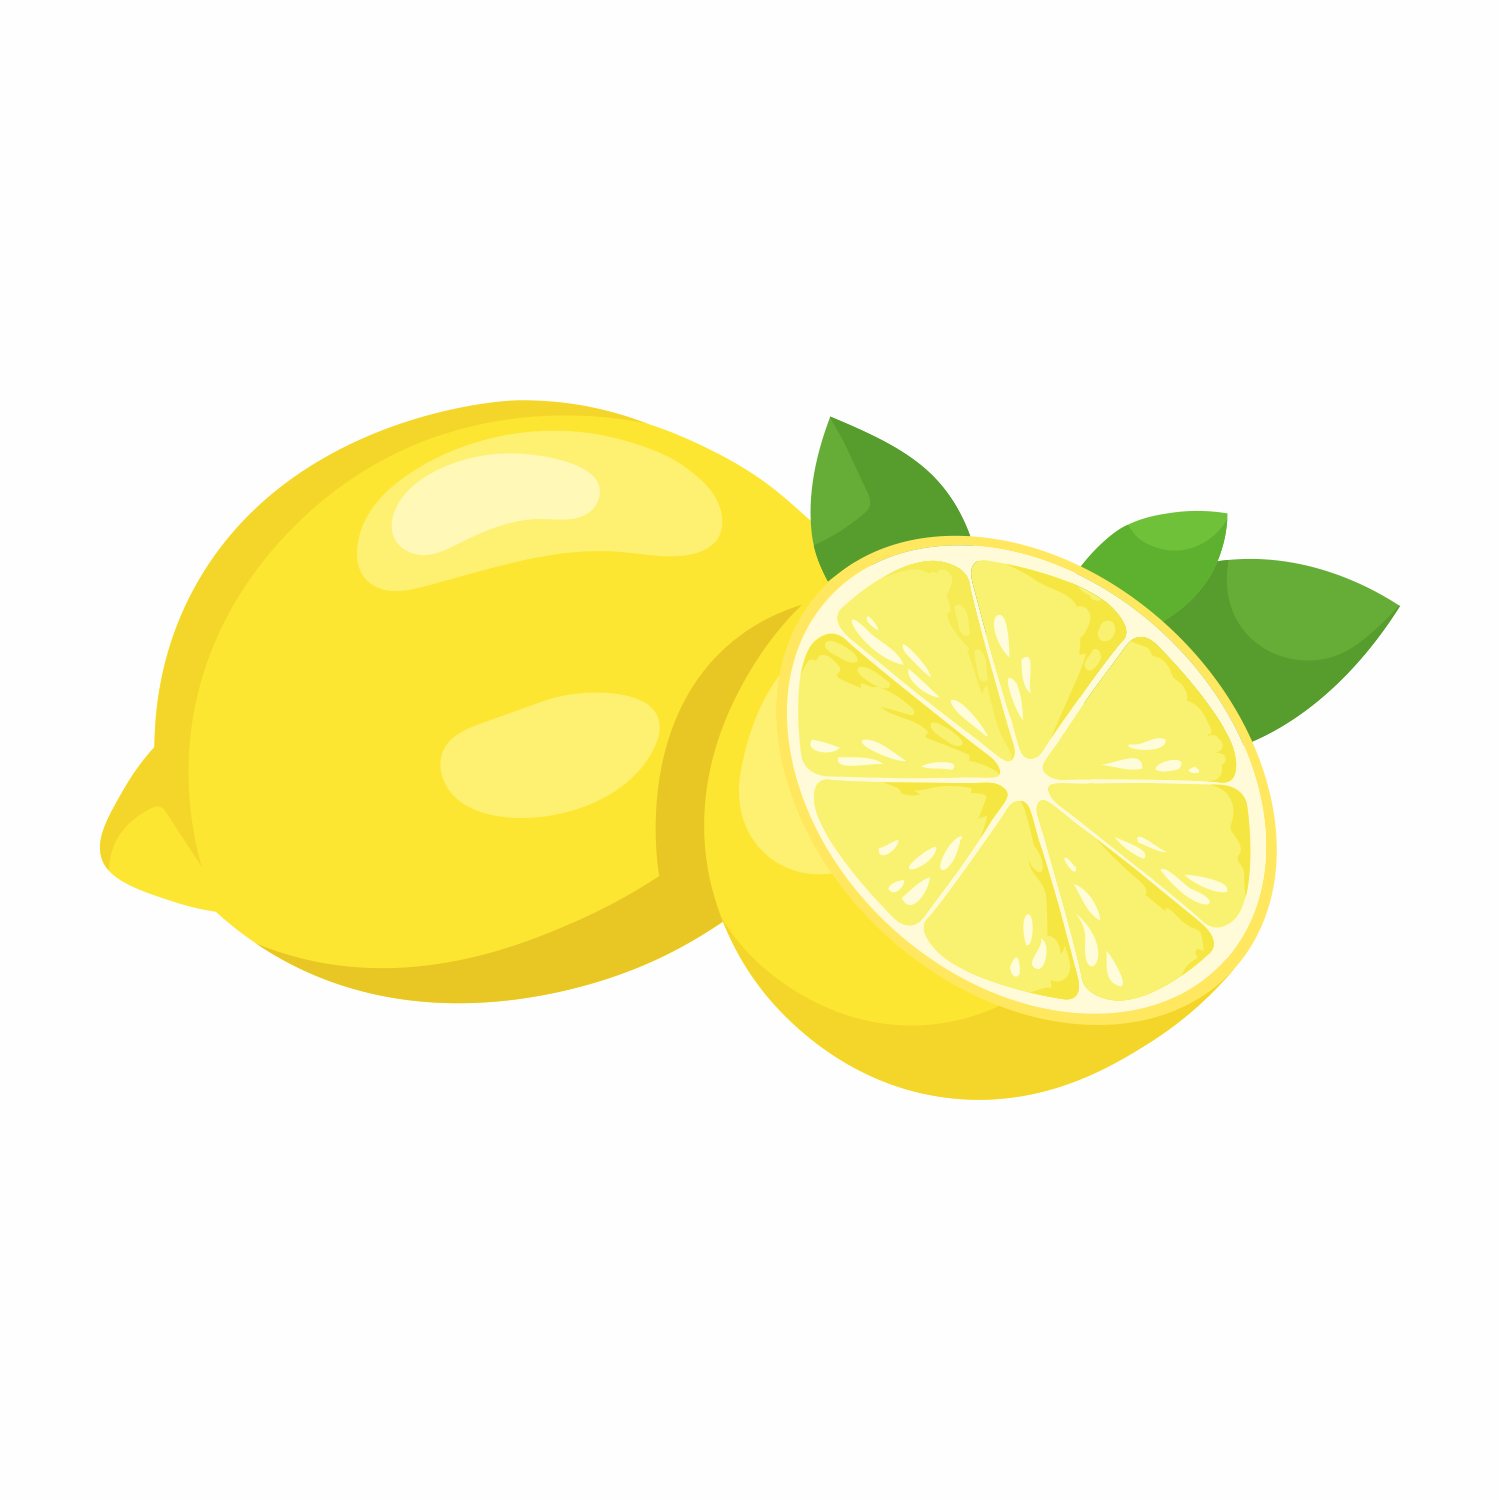 Citrus Limon (Lemon) Fruit Extract: A Brightening and Refreshing Ingredient for Your Skin